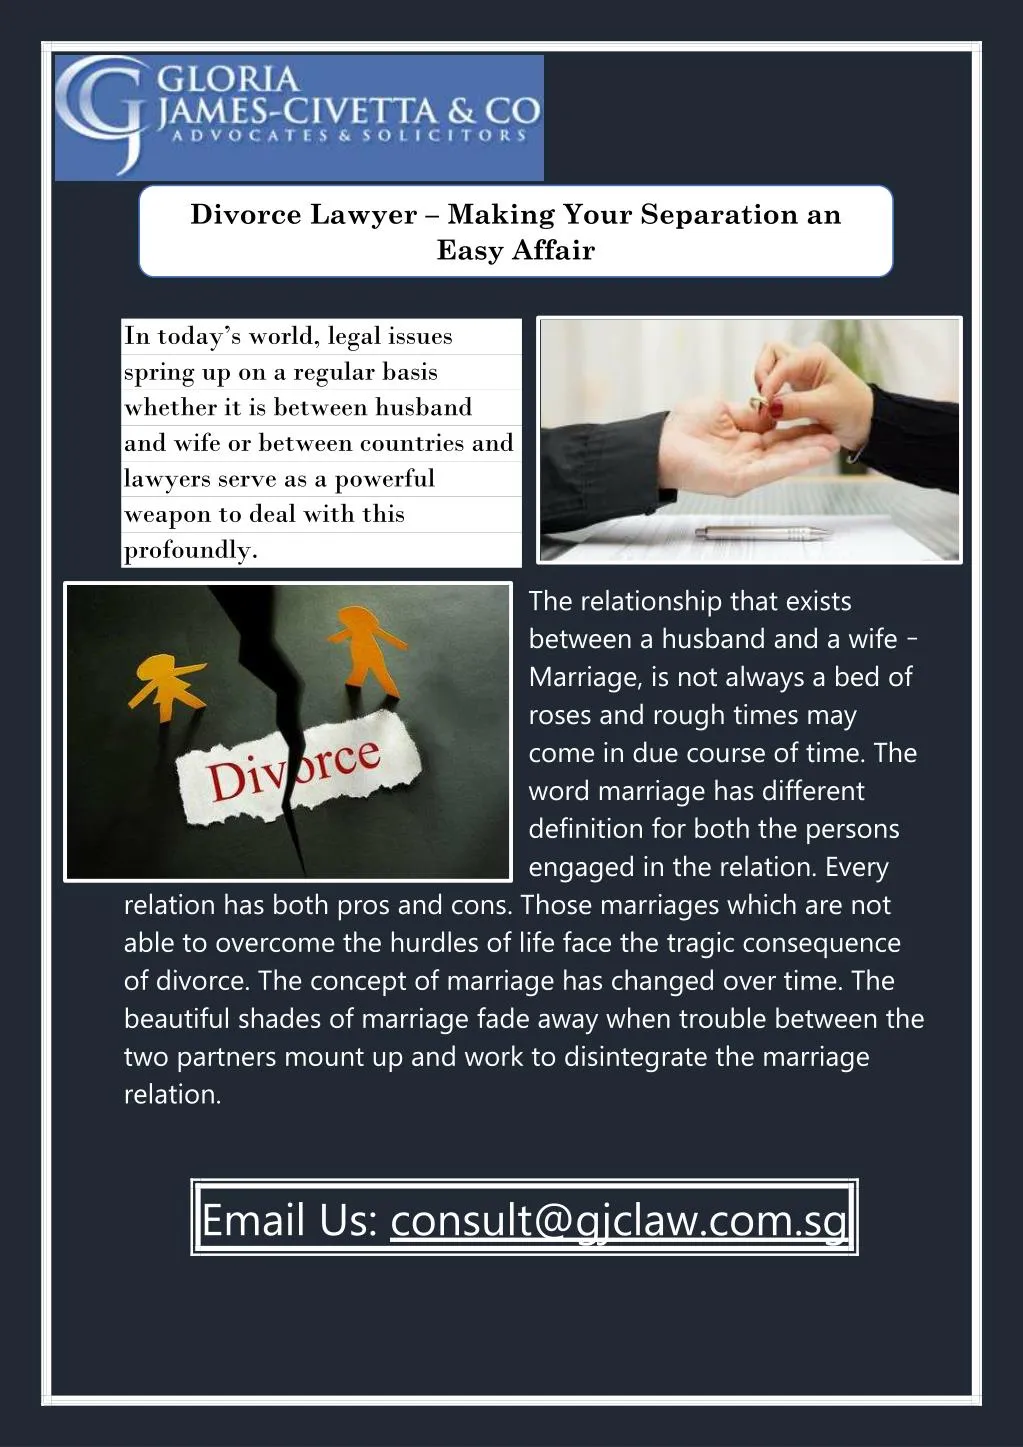 divorce lawyer making your separation an easy